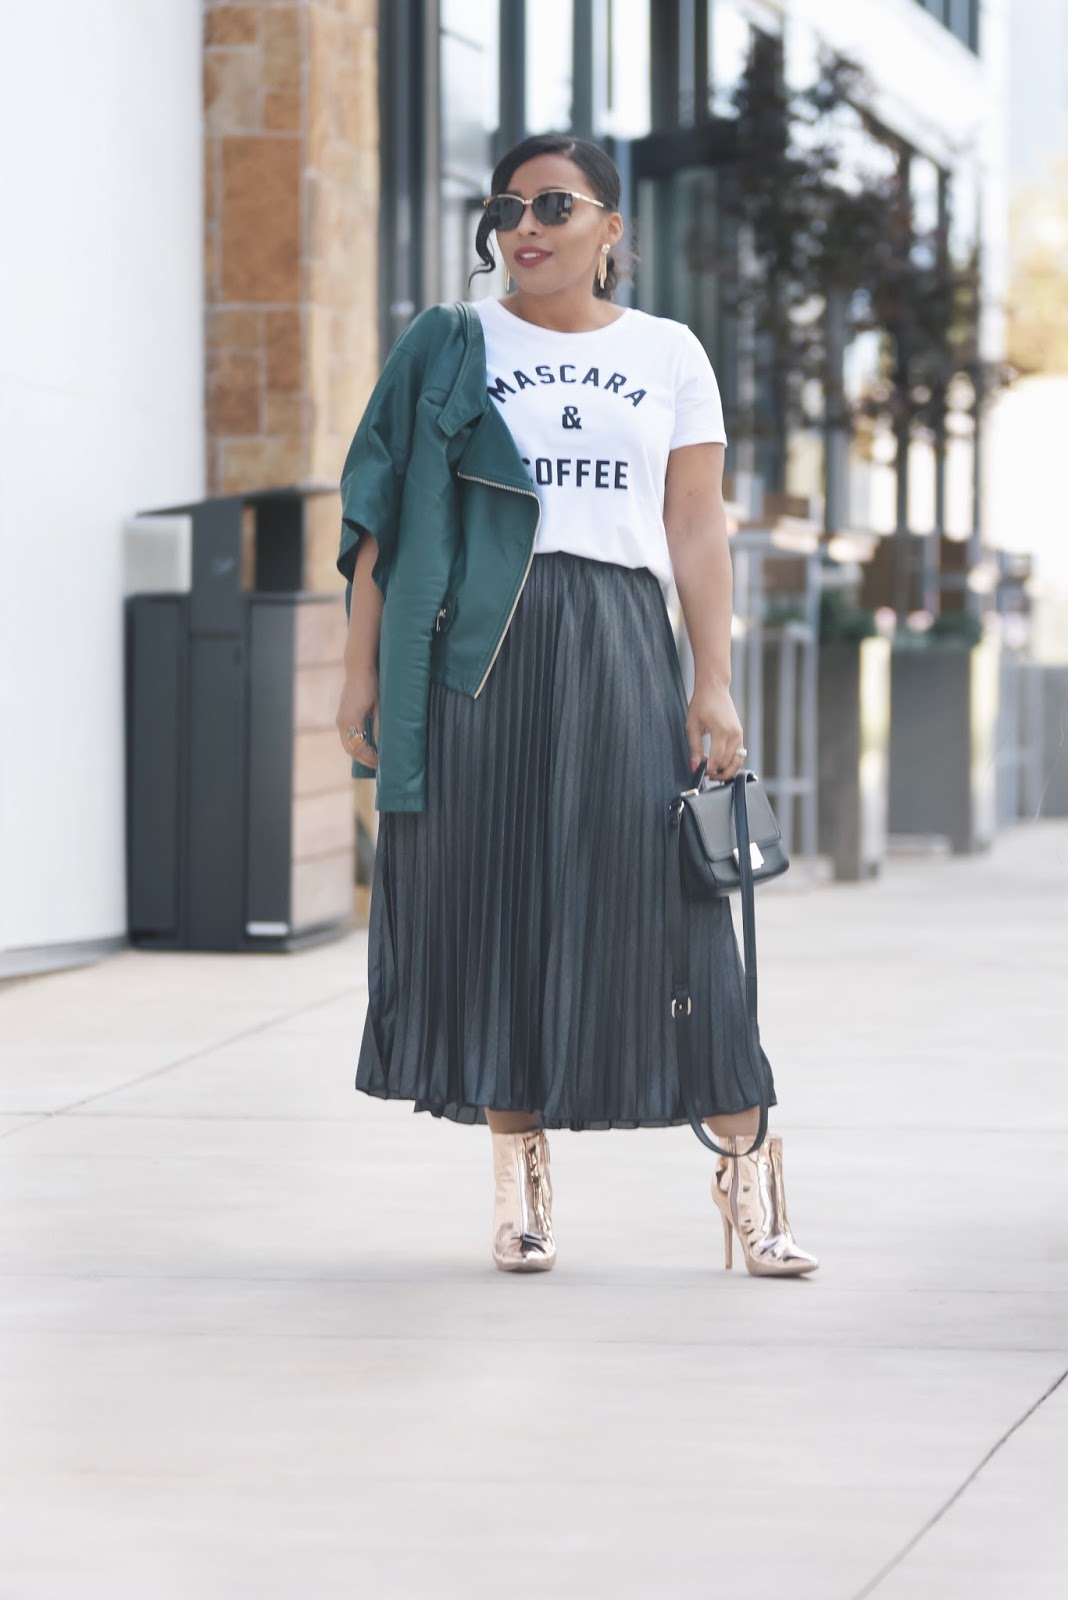 Fall outfits, pleated skirt, moto jacket, amiclubwear shoes, streetstyle, blogger outfits, october, pumpkins, armandhugon, latina bloggers, graphic tee